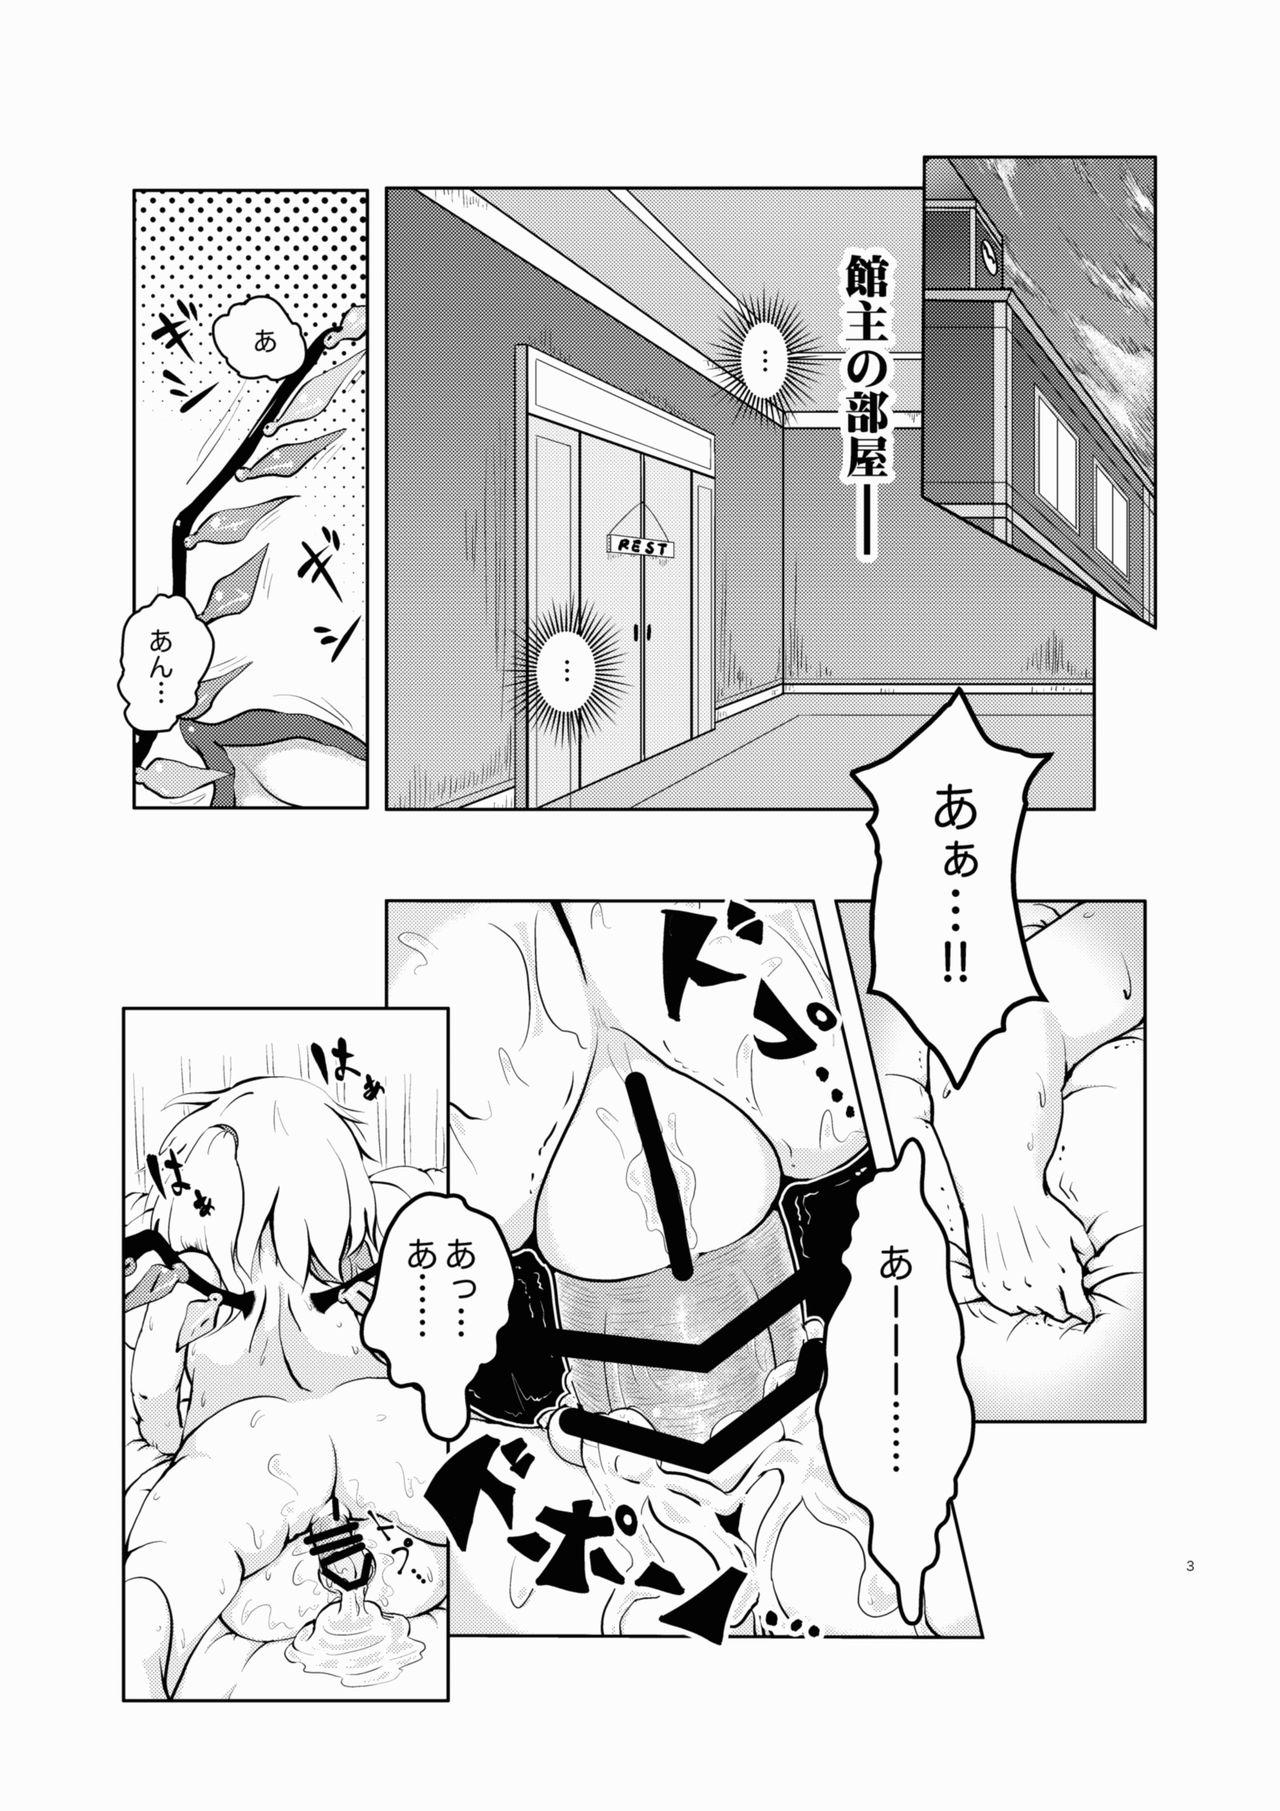 Cumshot Scarlet Conflict 1 - Touhou project Teenage Porn - Page 3